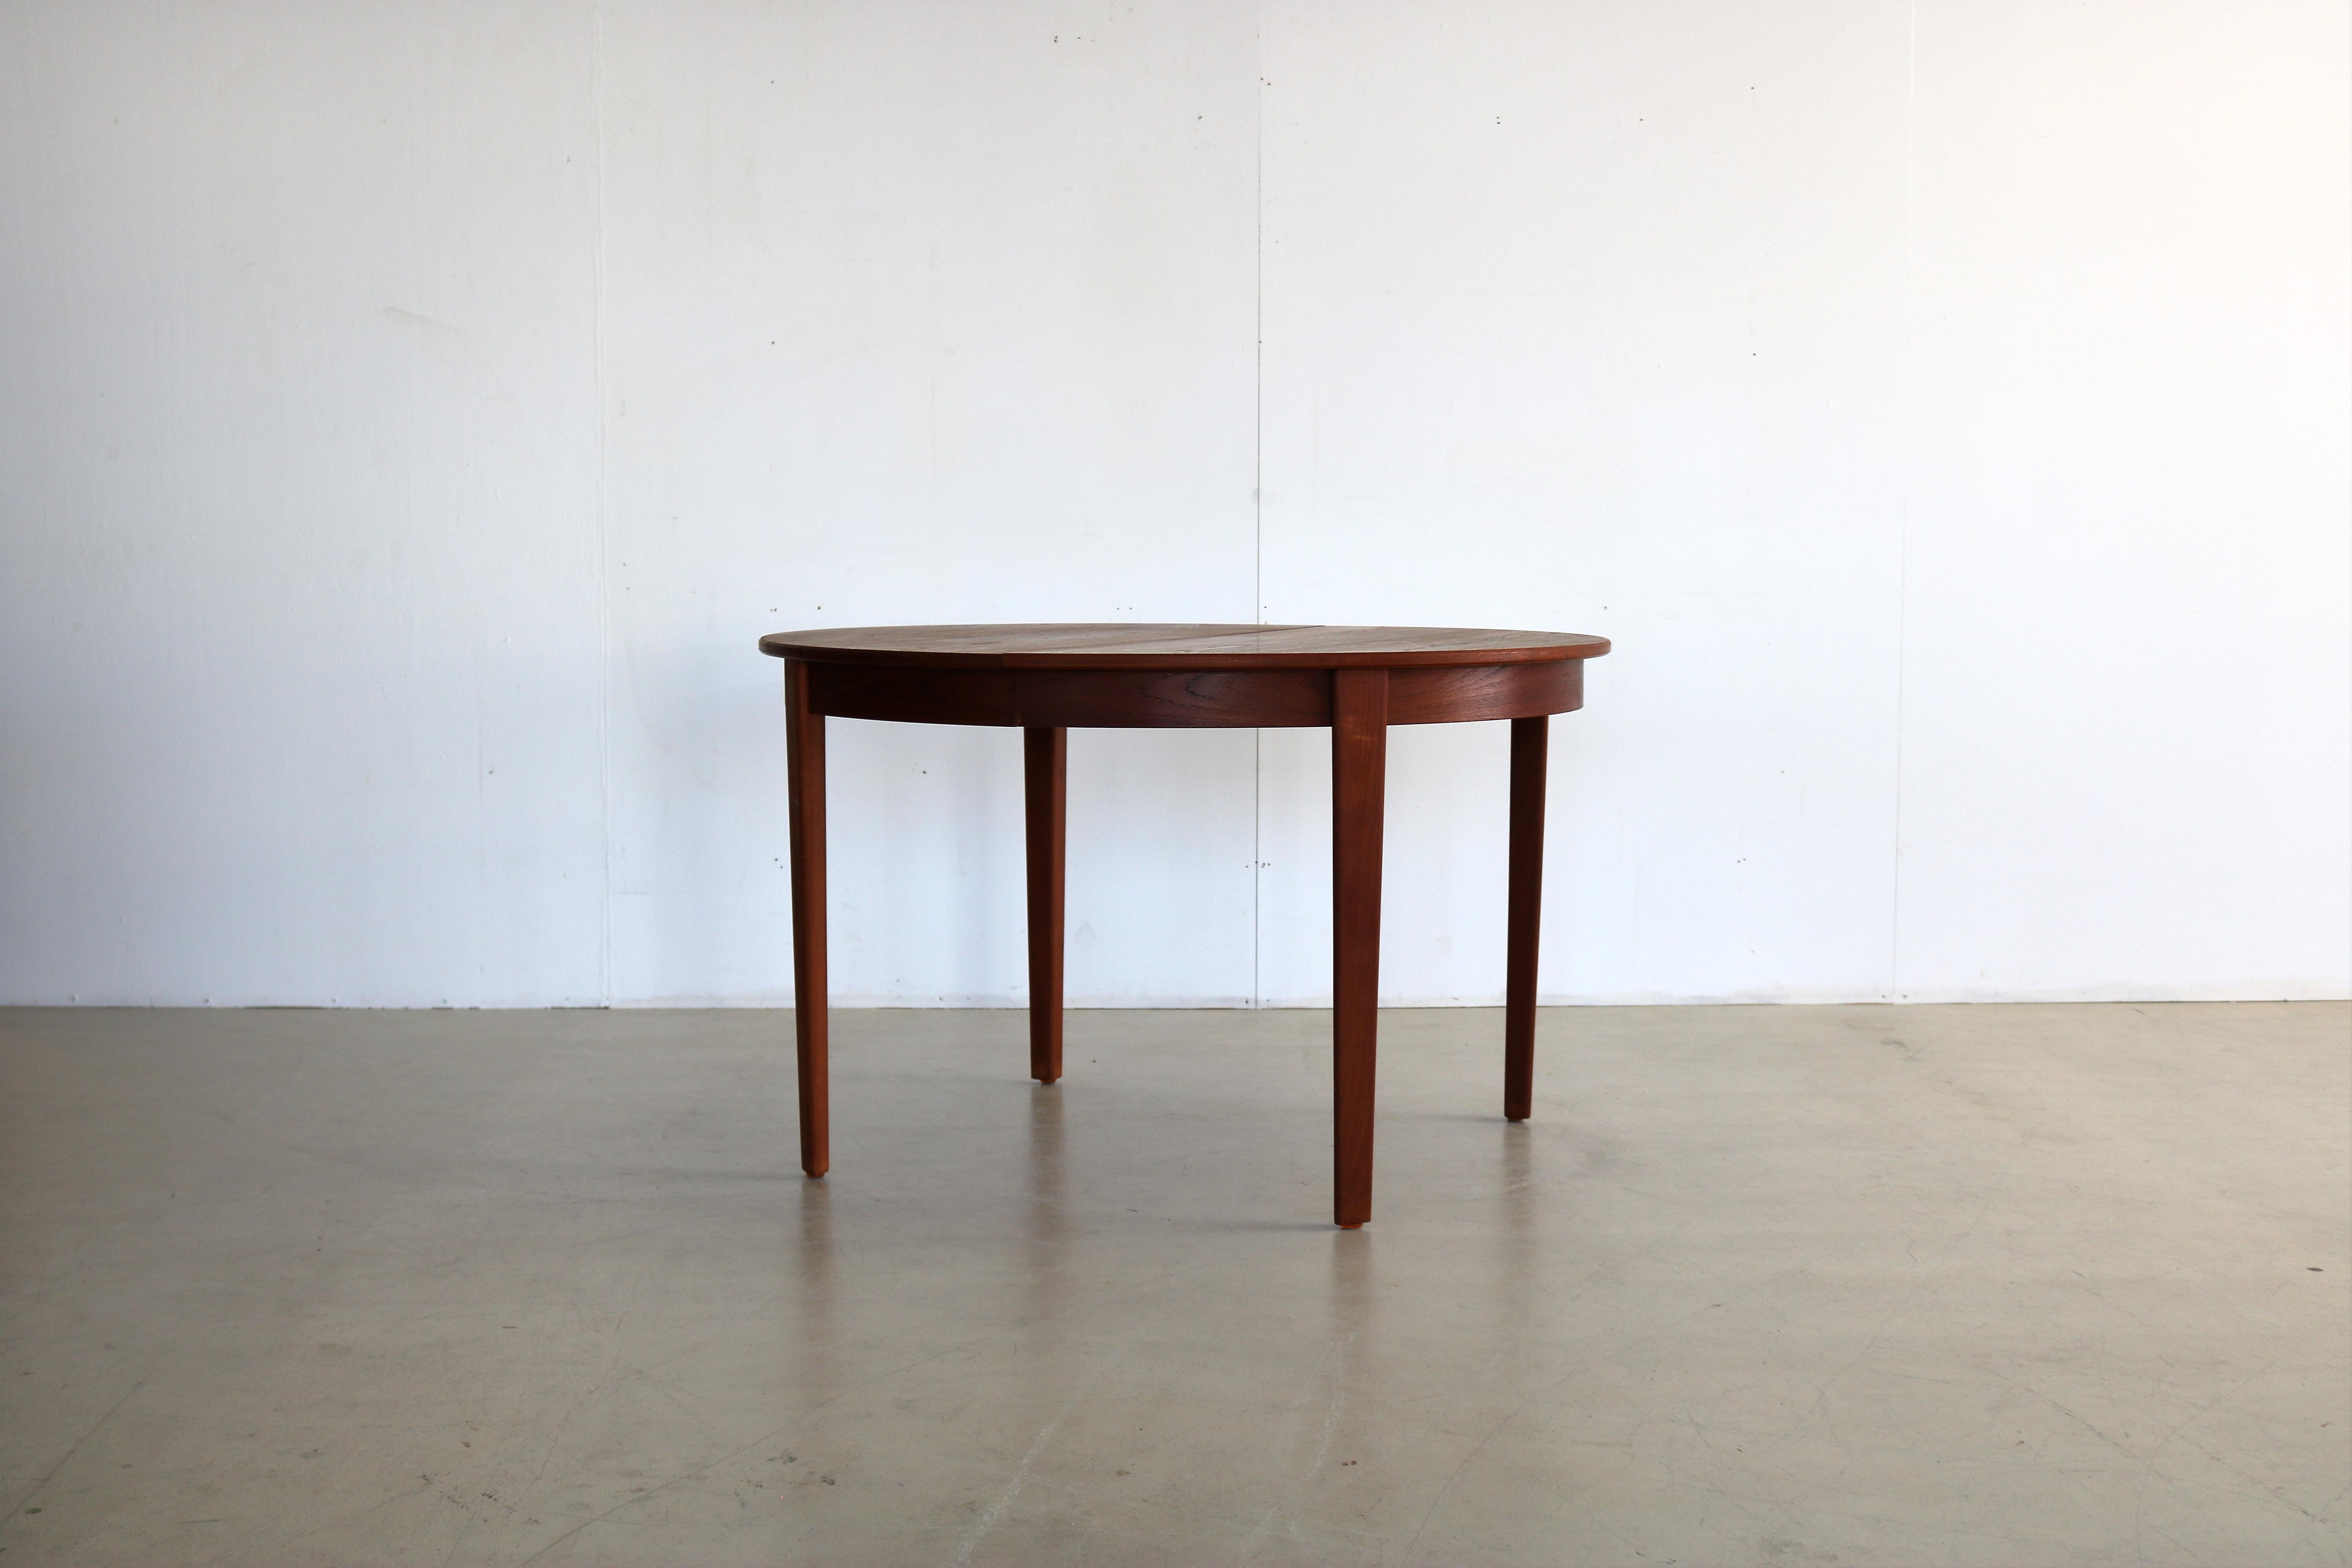 Vintage dining table table extendable teak Danish.

Period 1960s
Designs attributed to Henning Kjaernulf Denmark
Conditions good light signs of use
Size 74.5 x 120 x 120 (hxwxd) + 4x table top of 50 cm;

Details oak; extendable with 4